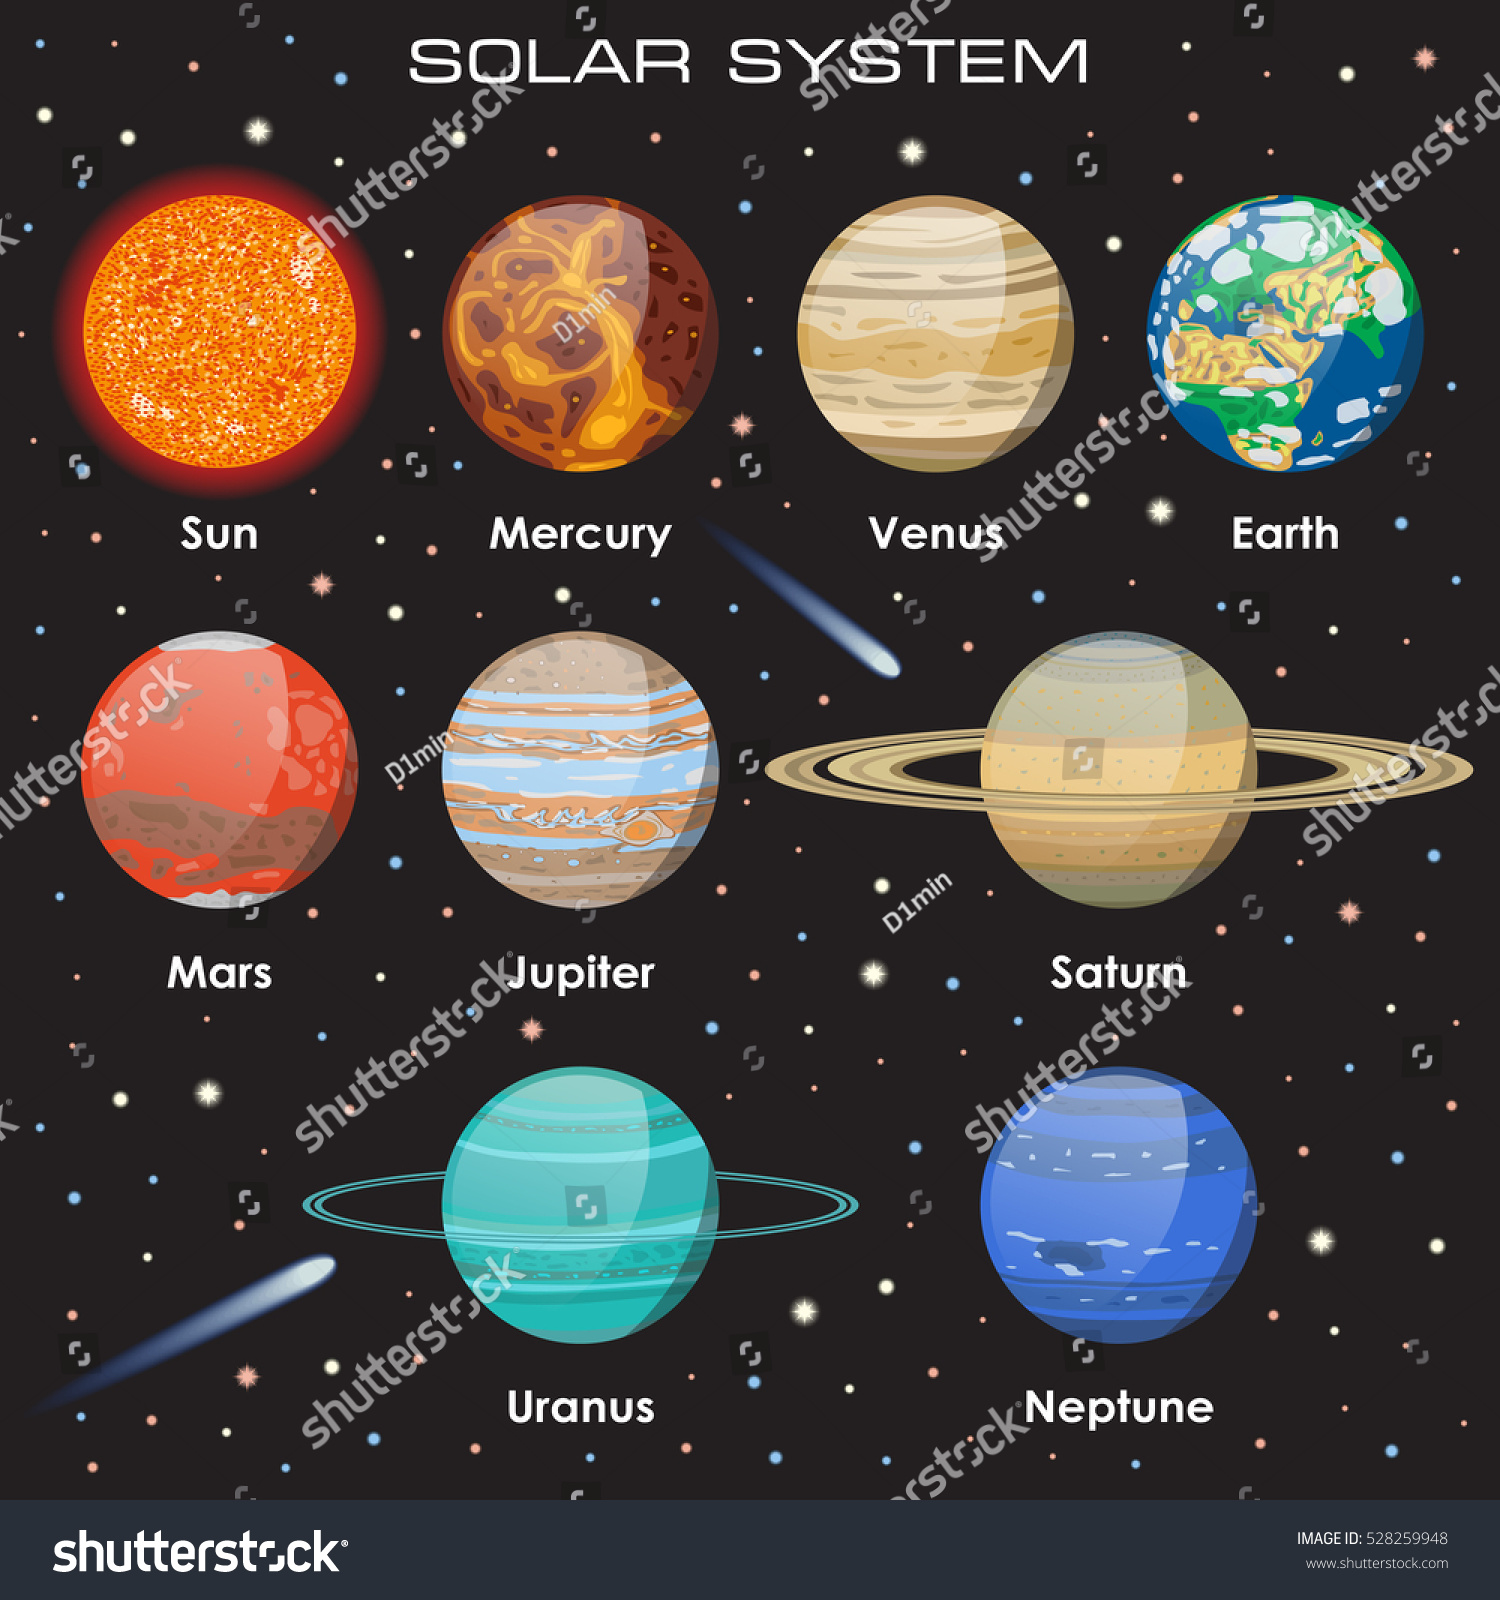 Planets Vector Set On Dark Background. Our Solar System. - 528259948 ...